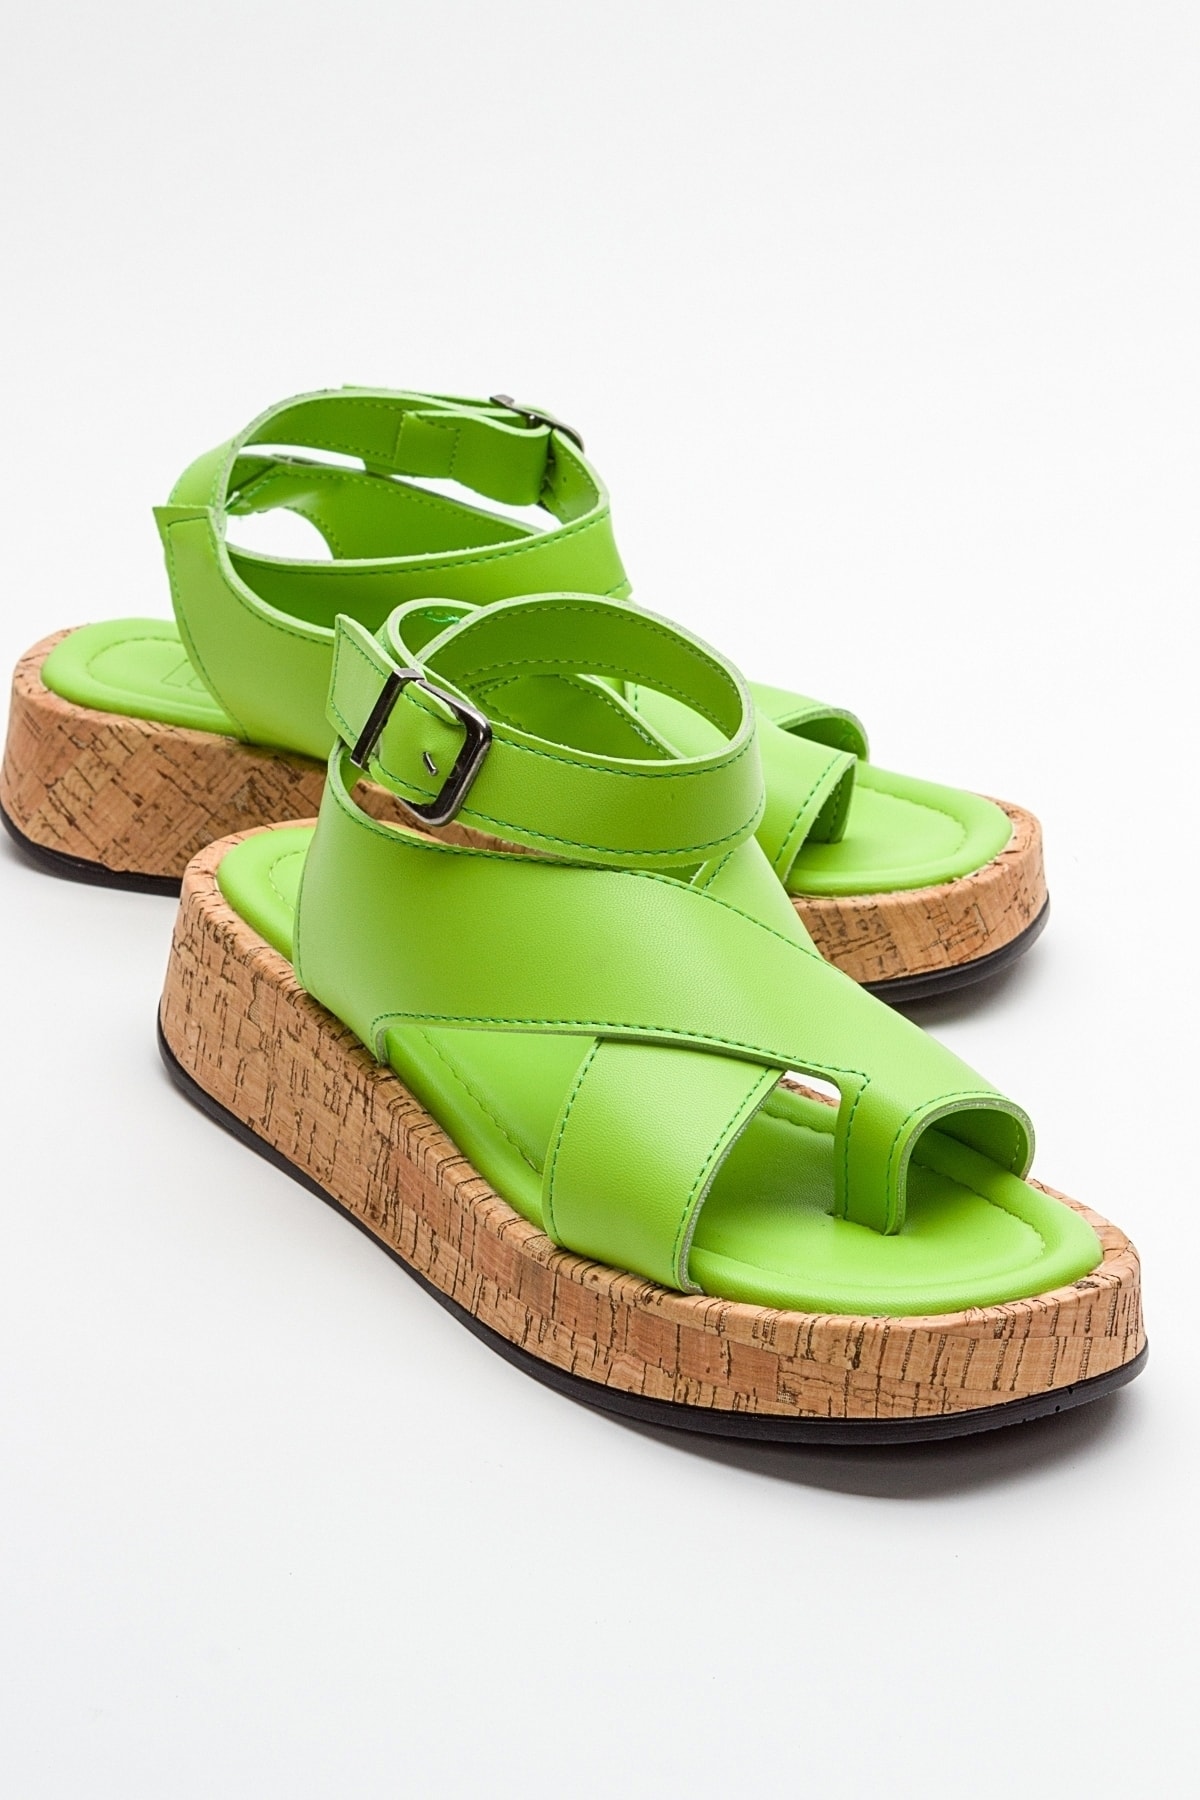 LuviShoes SARY Women's Green Sandals